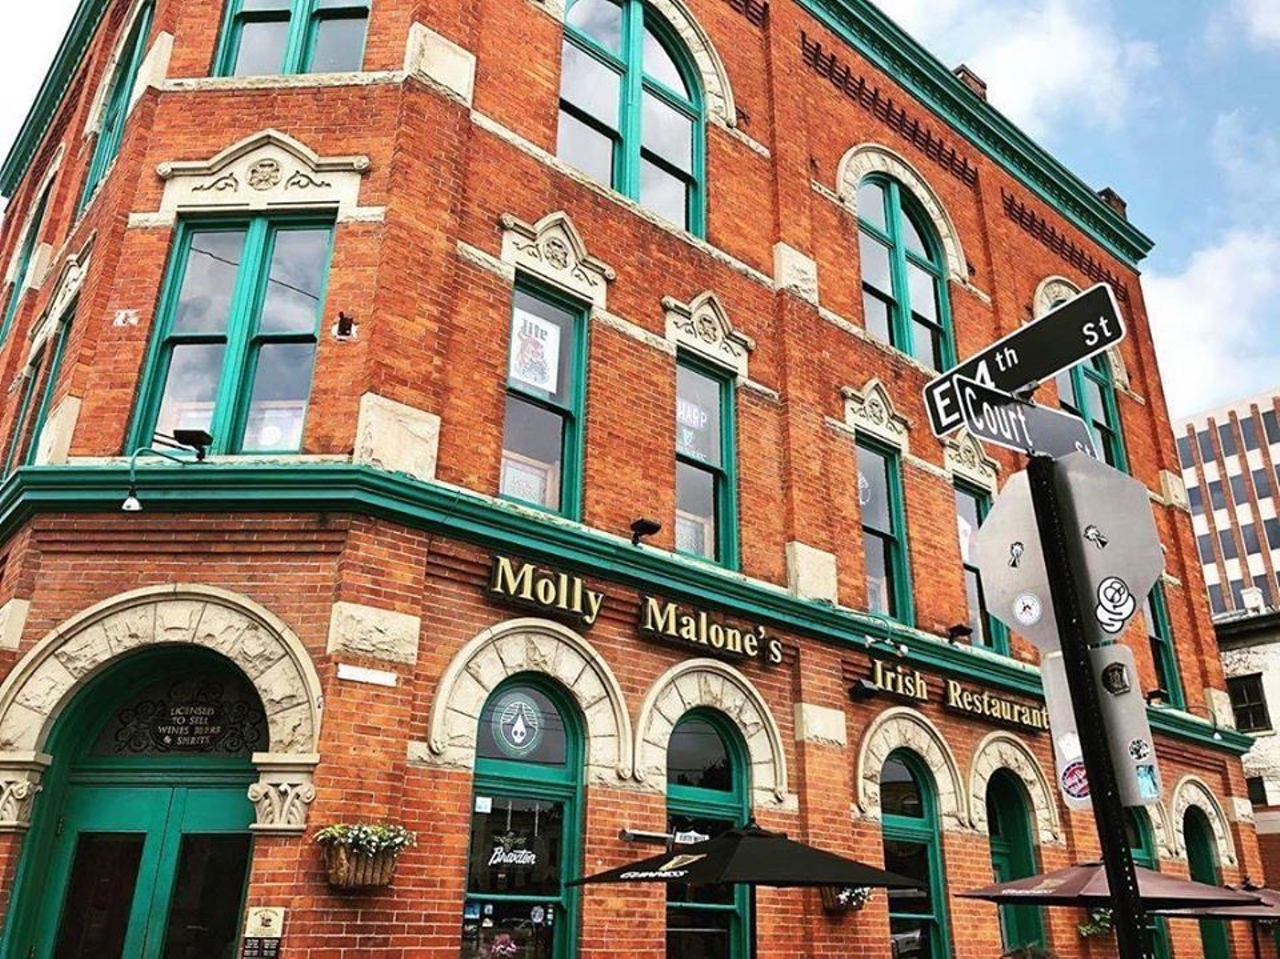 Molly Malone’s
112 E. Fourth St., Covington
Molly Malone’s restaurant and pub offers an authentic taste of the Emerald Isle with its menu full of traditional fare and appetizers such as their popular beer-battered cod served with coleslaw and chips. Open seven days a week for lunch and dinner, the pub plays just about every soccer and rugby game live, ideal for fans who want to down a pint while supporting their favorite team.